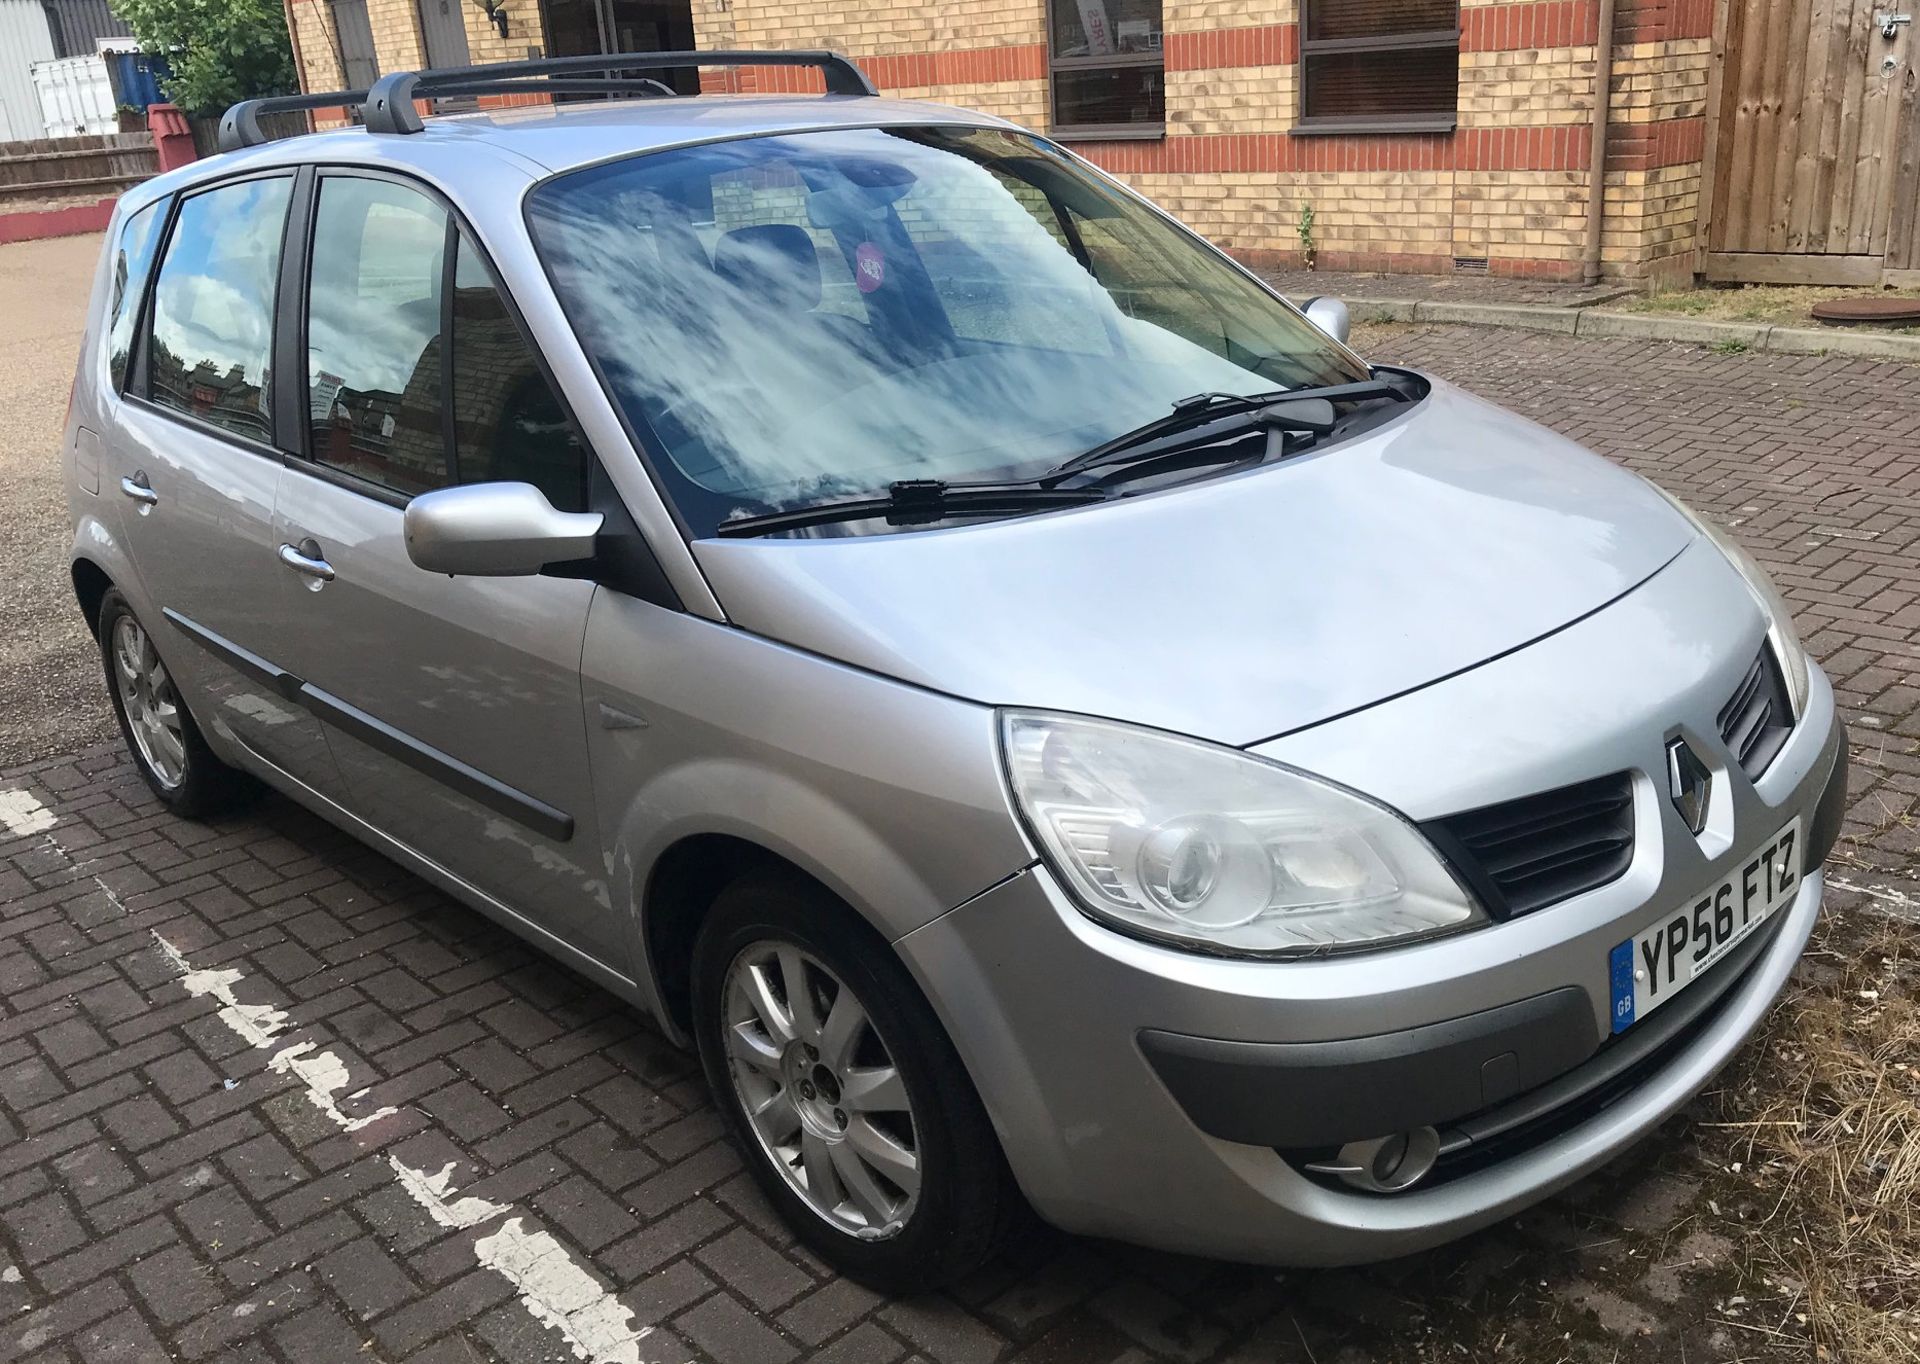 2006 Renault Scenic 1.6 VVT Dynamiq 5 Dr MPV - CL505 - NO VAT ON THE HAMMER - Location: Corby, Nort - Image 3 of 12